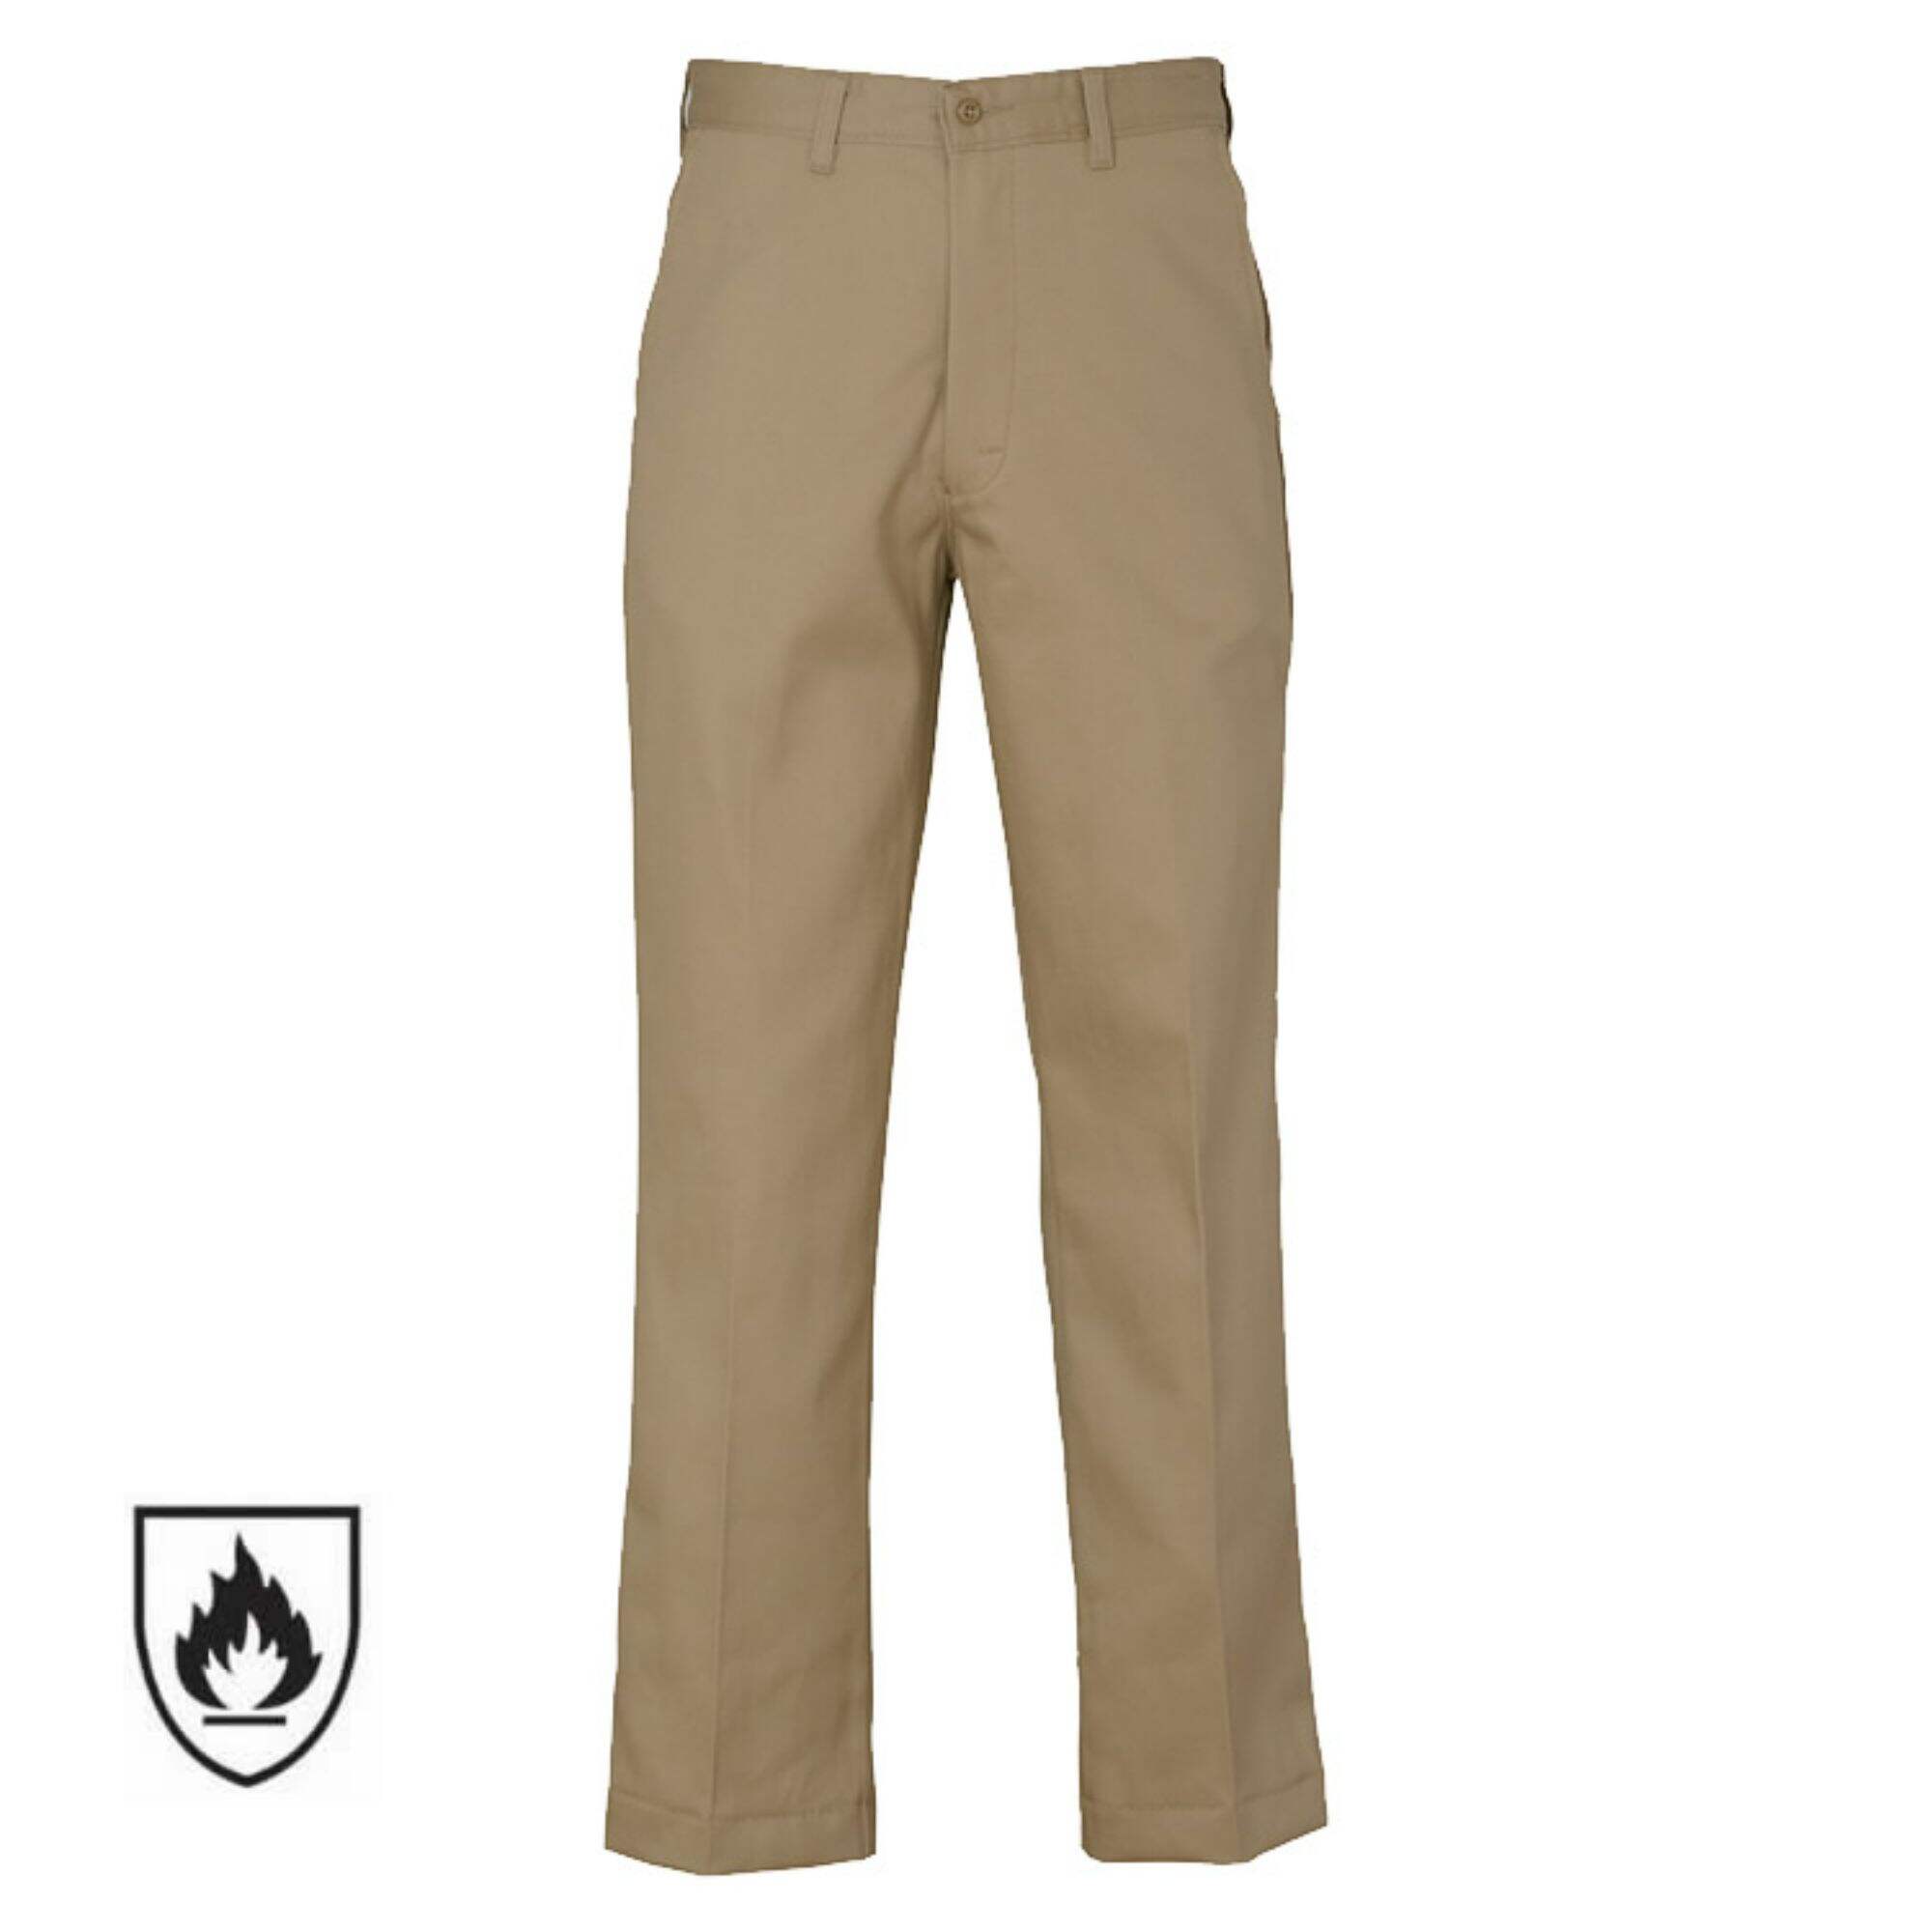 Casual Fire proof Pants Flat Front Cotton Spandex Antistatic Trousers